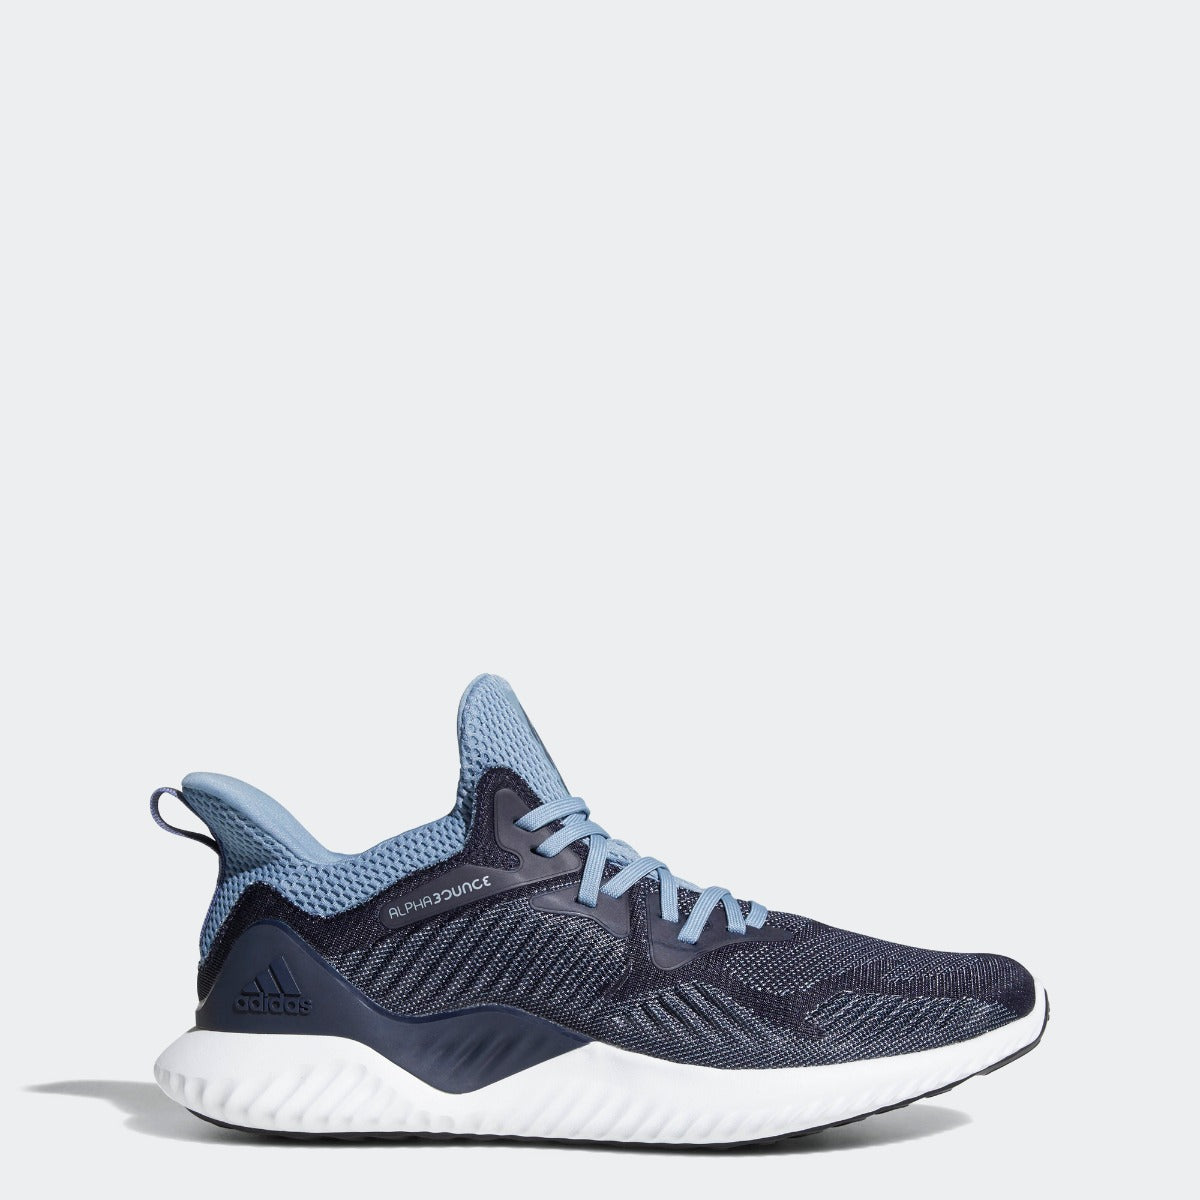 Adidas Alphabounce Beyond Shoes Navy Cg4764 Chicago City Sports